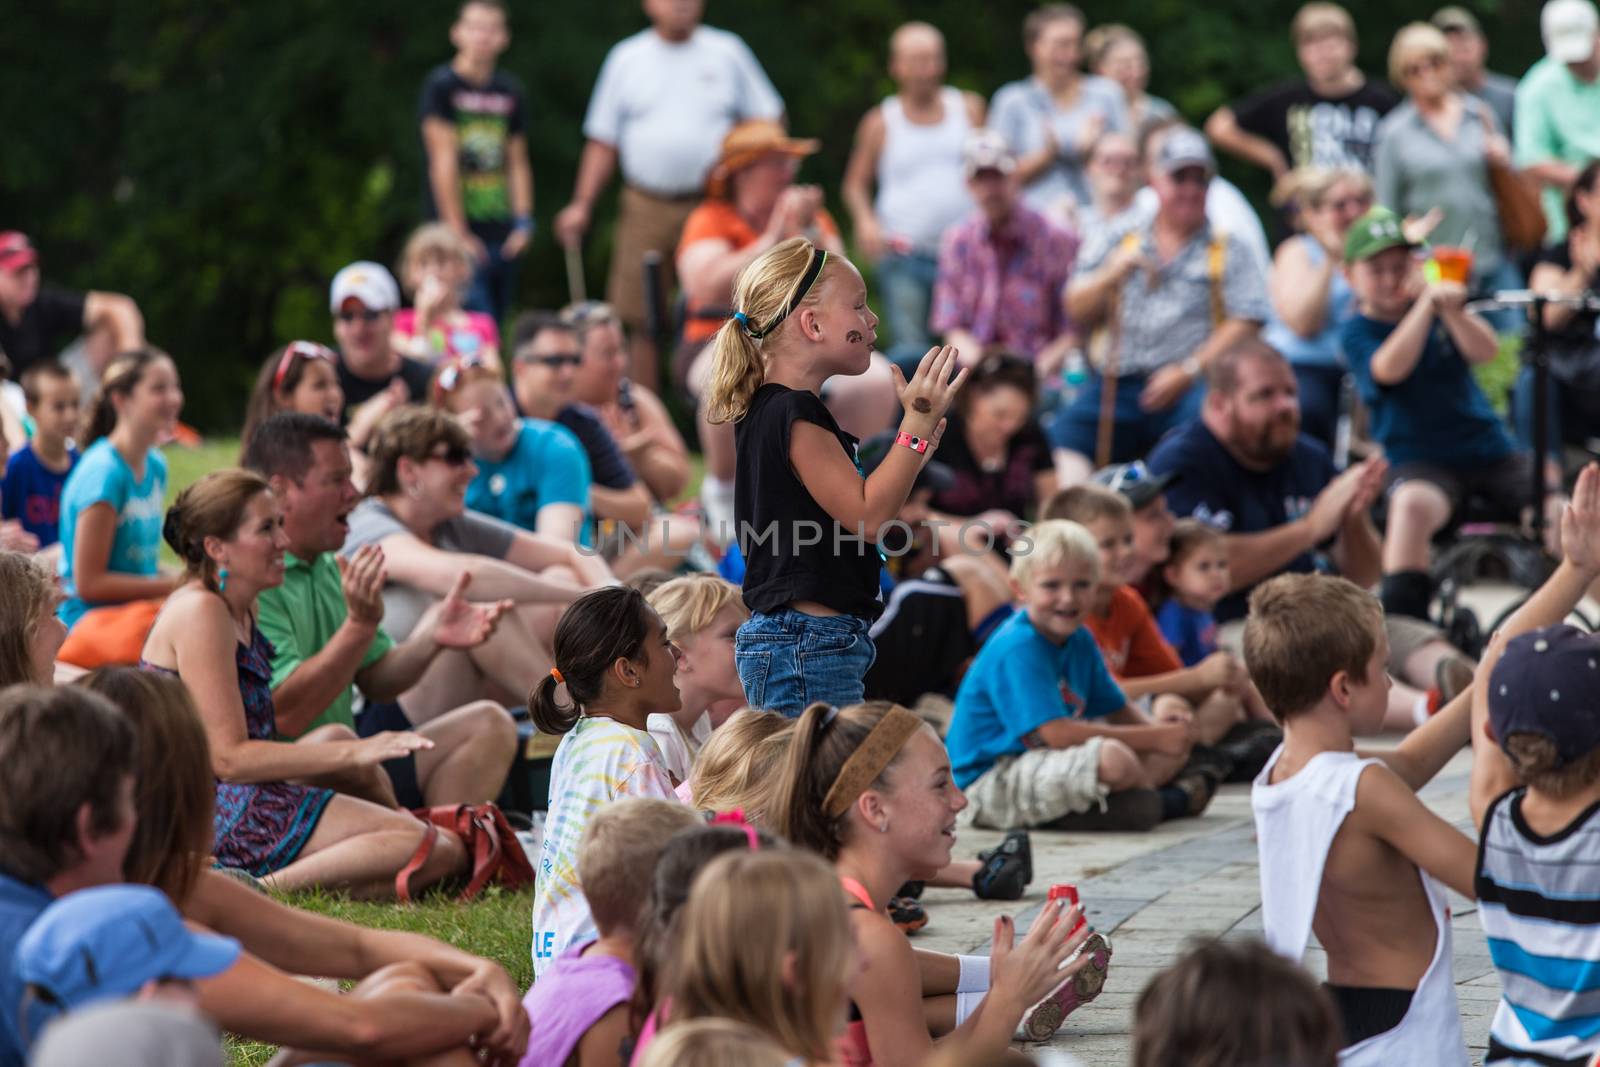 DES MOINES, IA /USA - AUGUST 10: Unidentified girl in audience at the Iowa State Fair on August 10, 2014 in Des Moines, Iowa, USA.